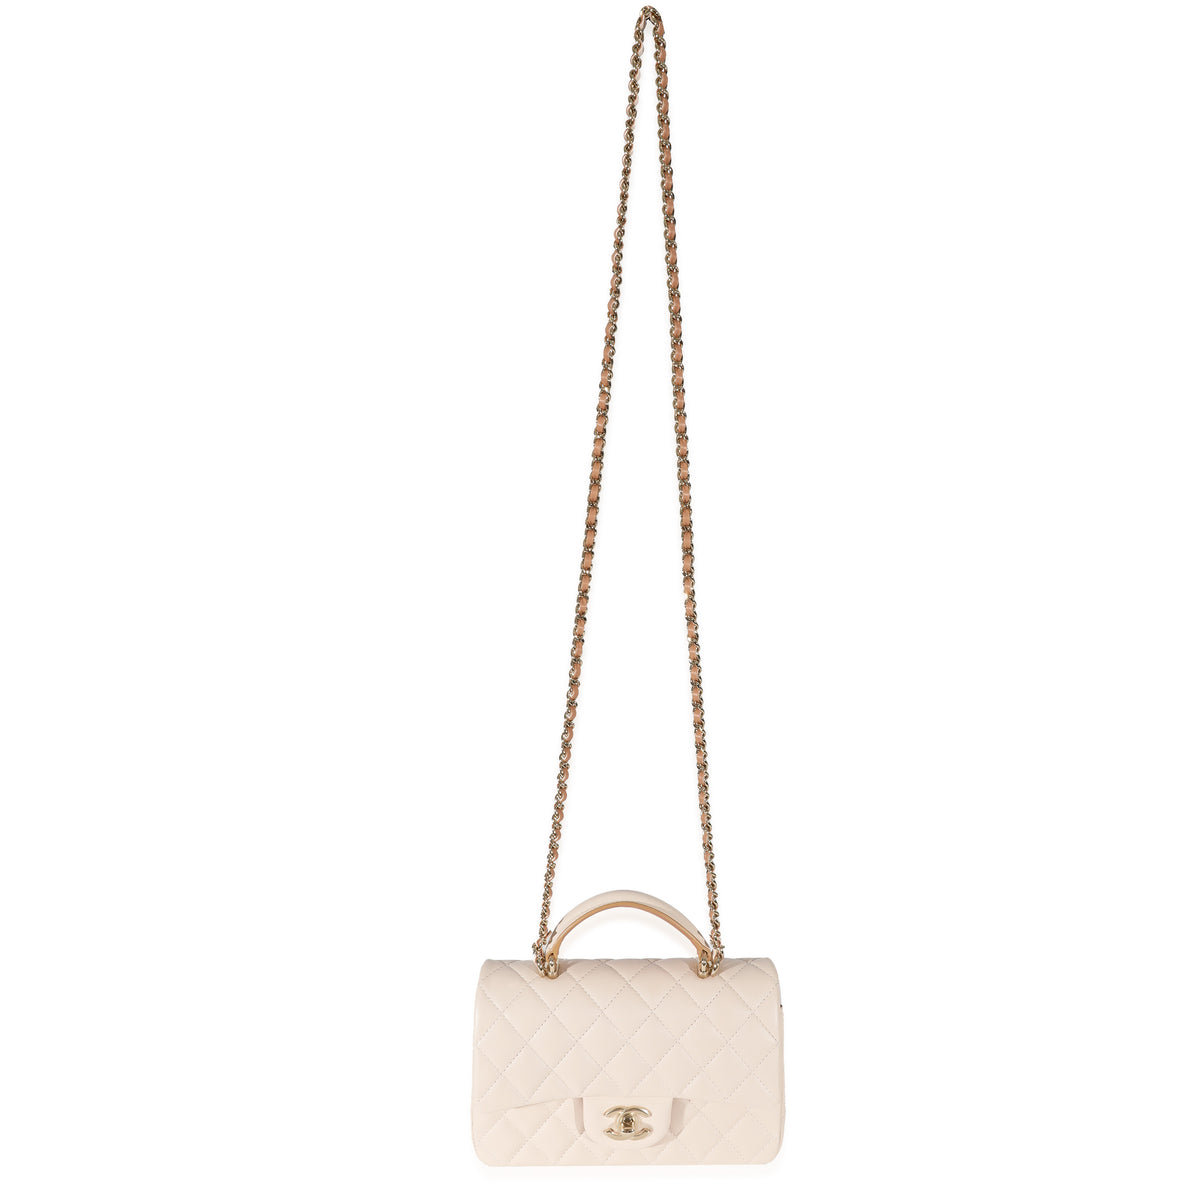 Only 2358.00 usd for CHANEL 19 Small Flap Bag in Light Beige Lambskin  Online at the Shop